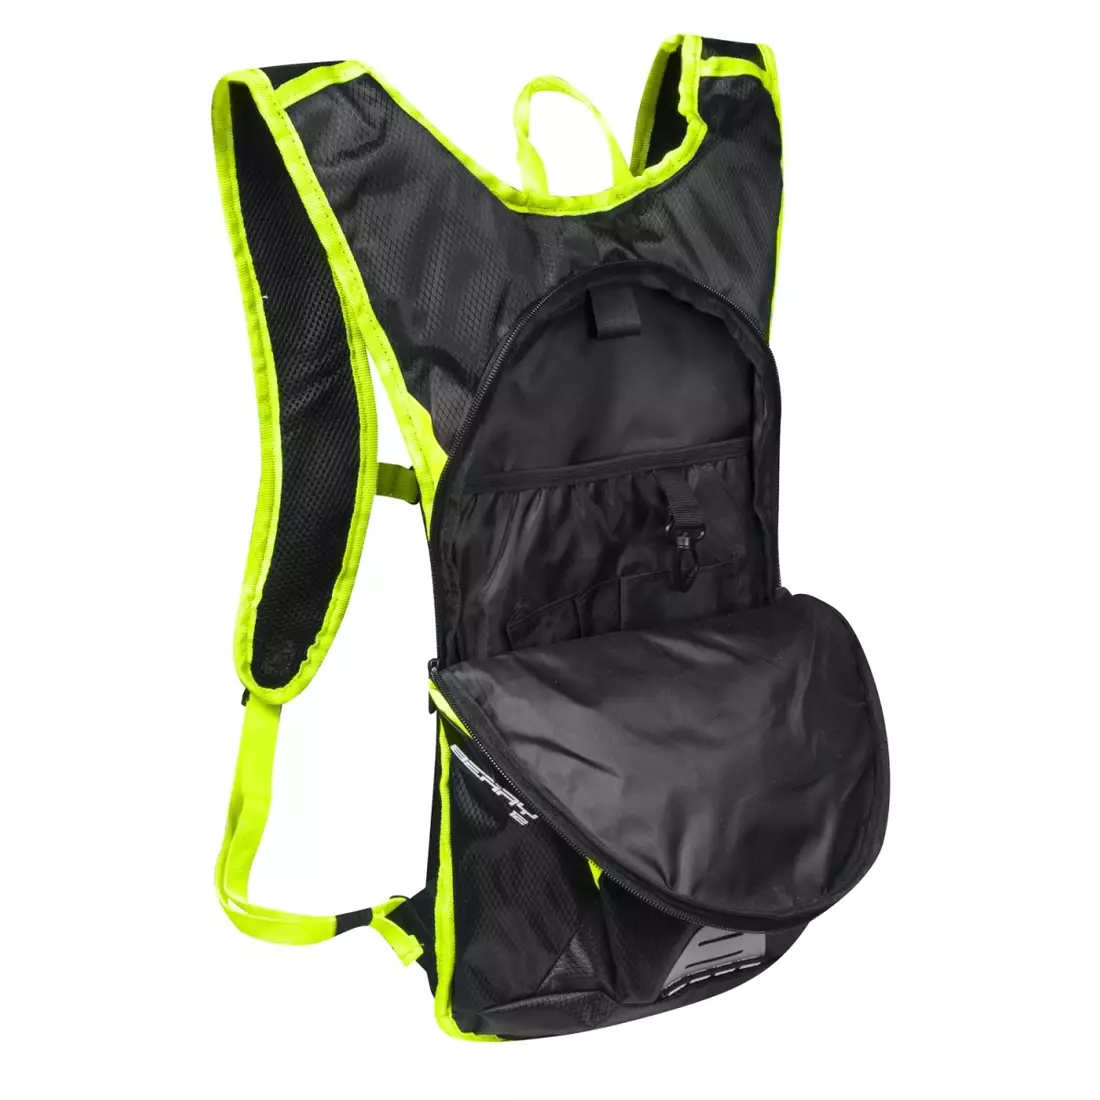 FORCE BERRY 12L backpack 896703 black and fluorine